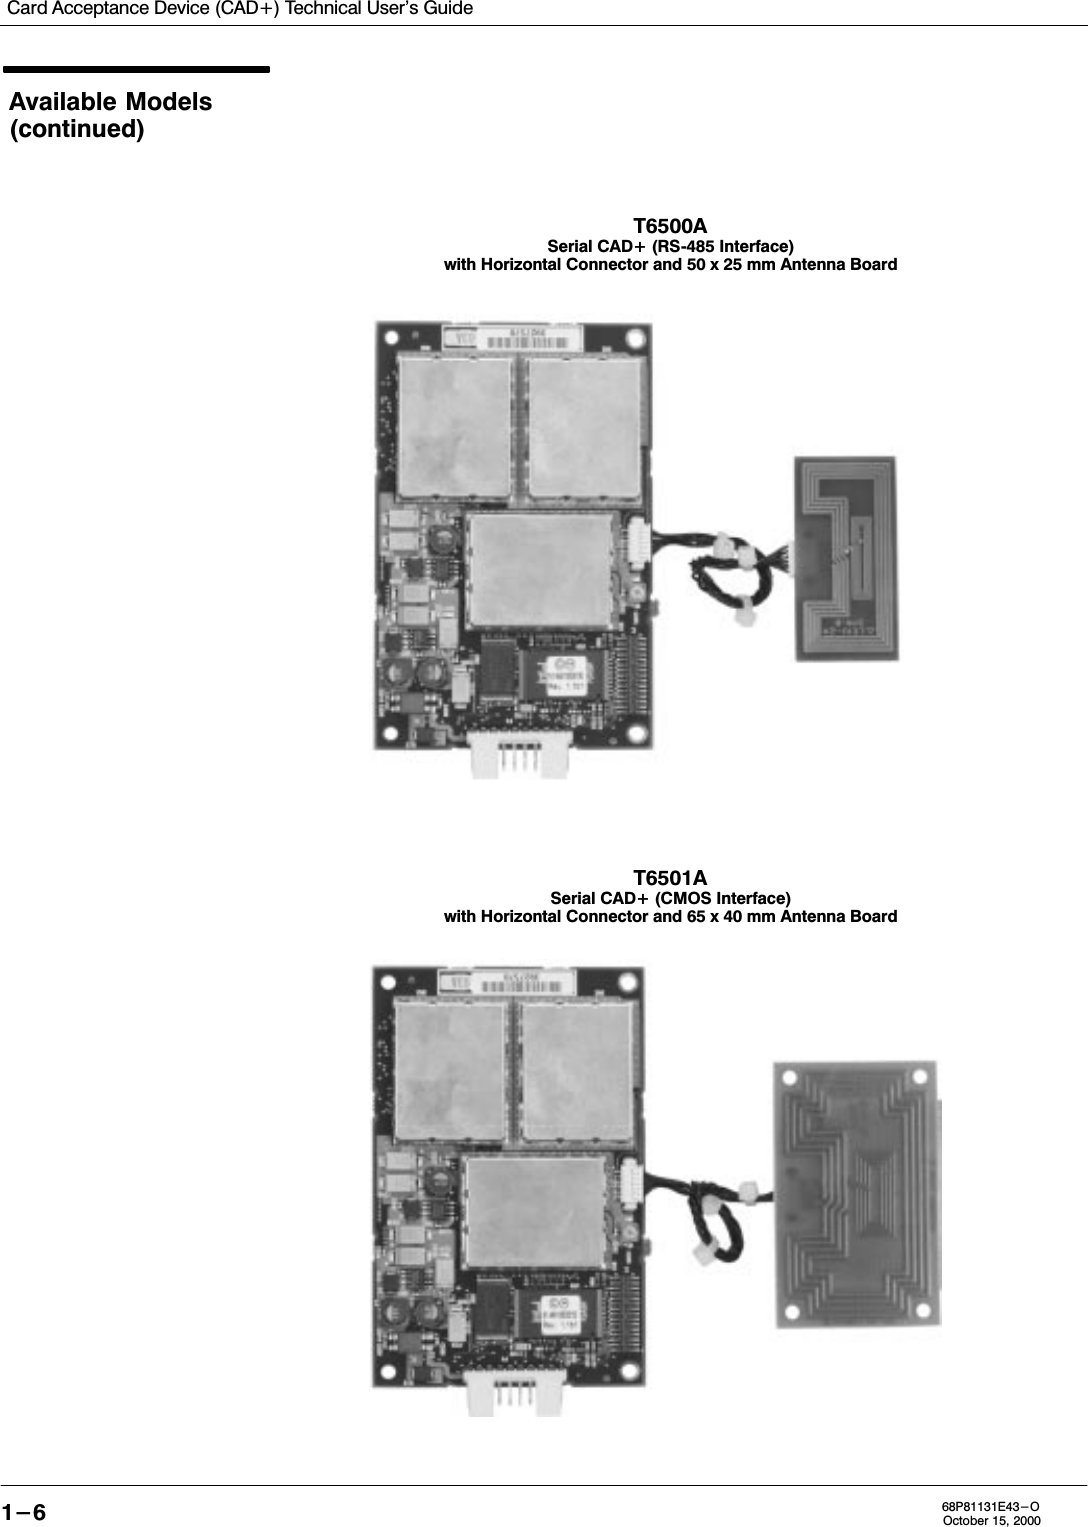 Card Acceptance Device (CAD+) Technical User&apos;s Guide1-6 68P81131E43-OOctober 15, 2000Available Models(continued)T6500ASerial CAD+ (RS485 Interface)with Horizontal Connector and 50 x 25 mm Antenna BoardT6501ASerial CAD+ (CMOS Interface)with Horizontal Connector and 65 x 40 mm Antenna Board